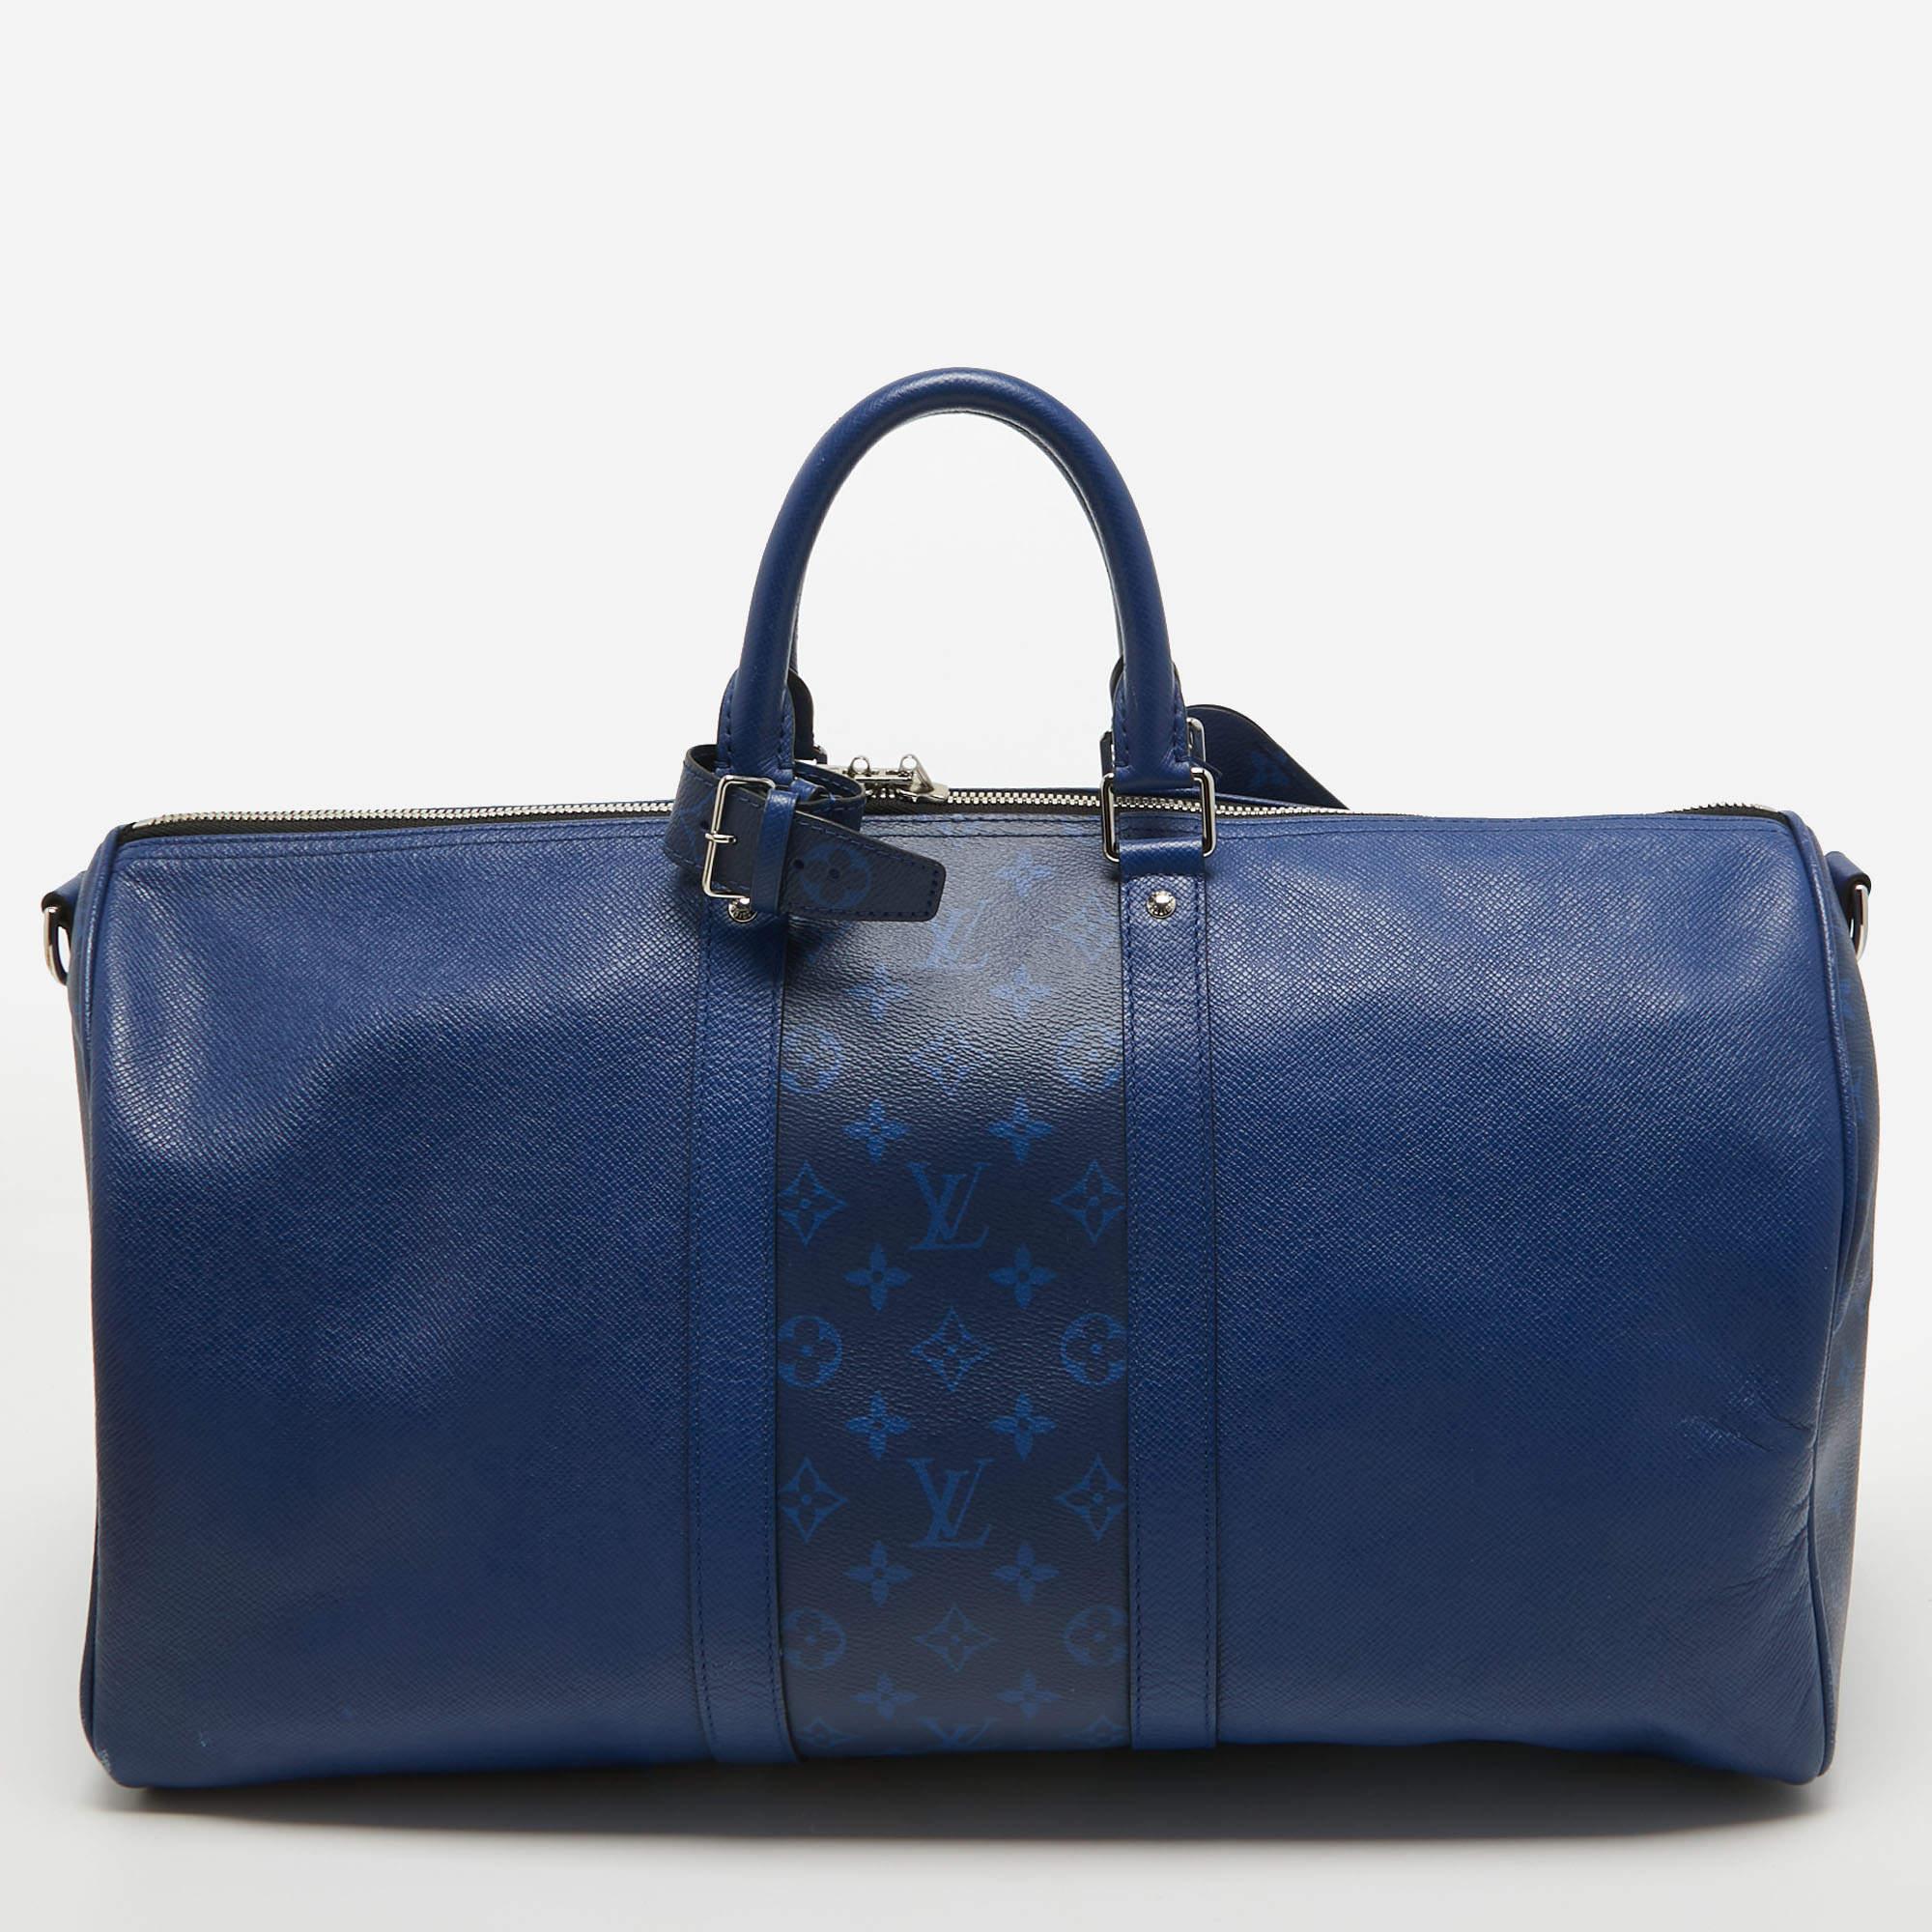 The Louis Vuitton Keepall Bandouliere 50 is a luxurious travel companion. Its exquisite design combines durable taiga leather in a striking Pacific Blue hue with the iconic Monogram Eclipse canvas. The spacious interior, reinforced leather handles,